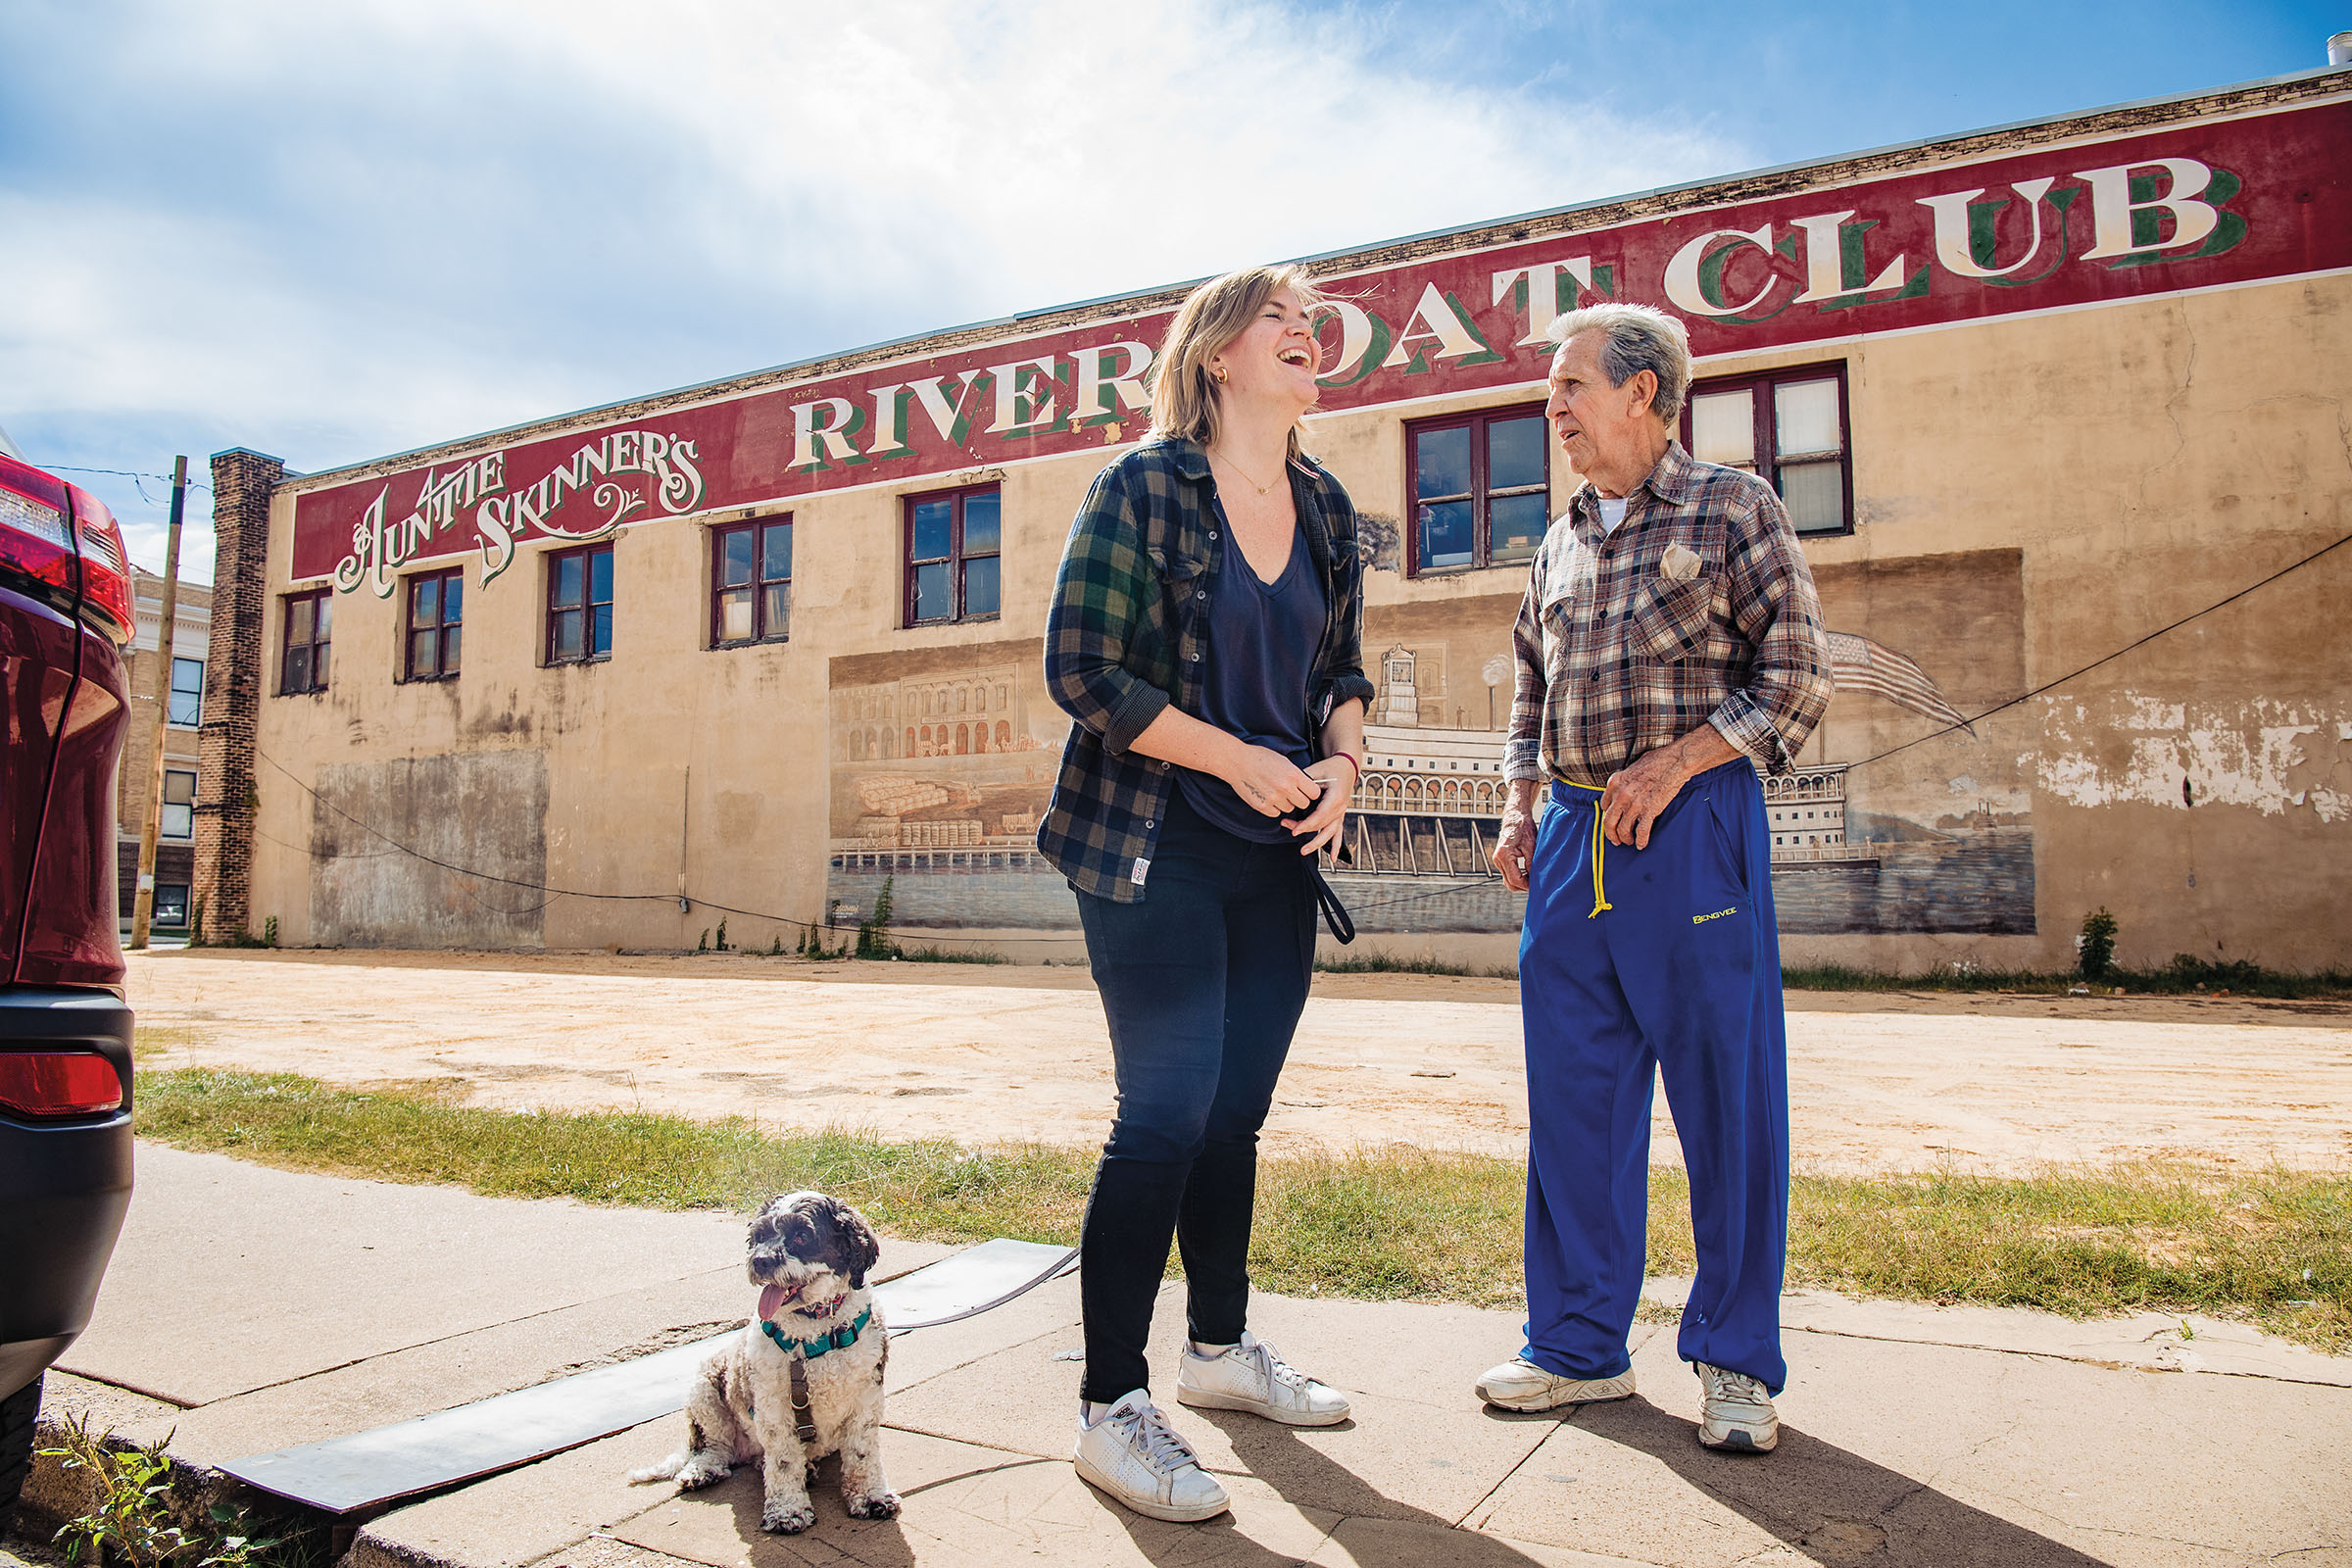 The author and her dog stand and laugh next to an older gentleman wearing jeans standing in front of an old building